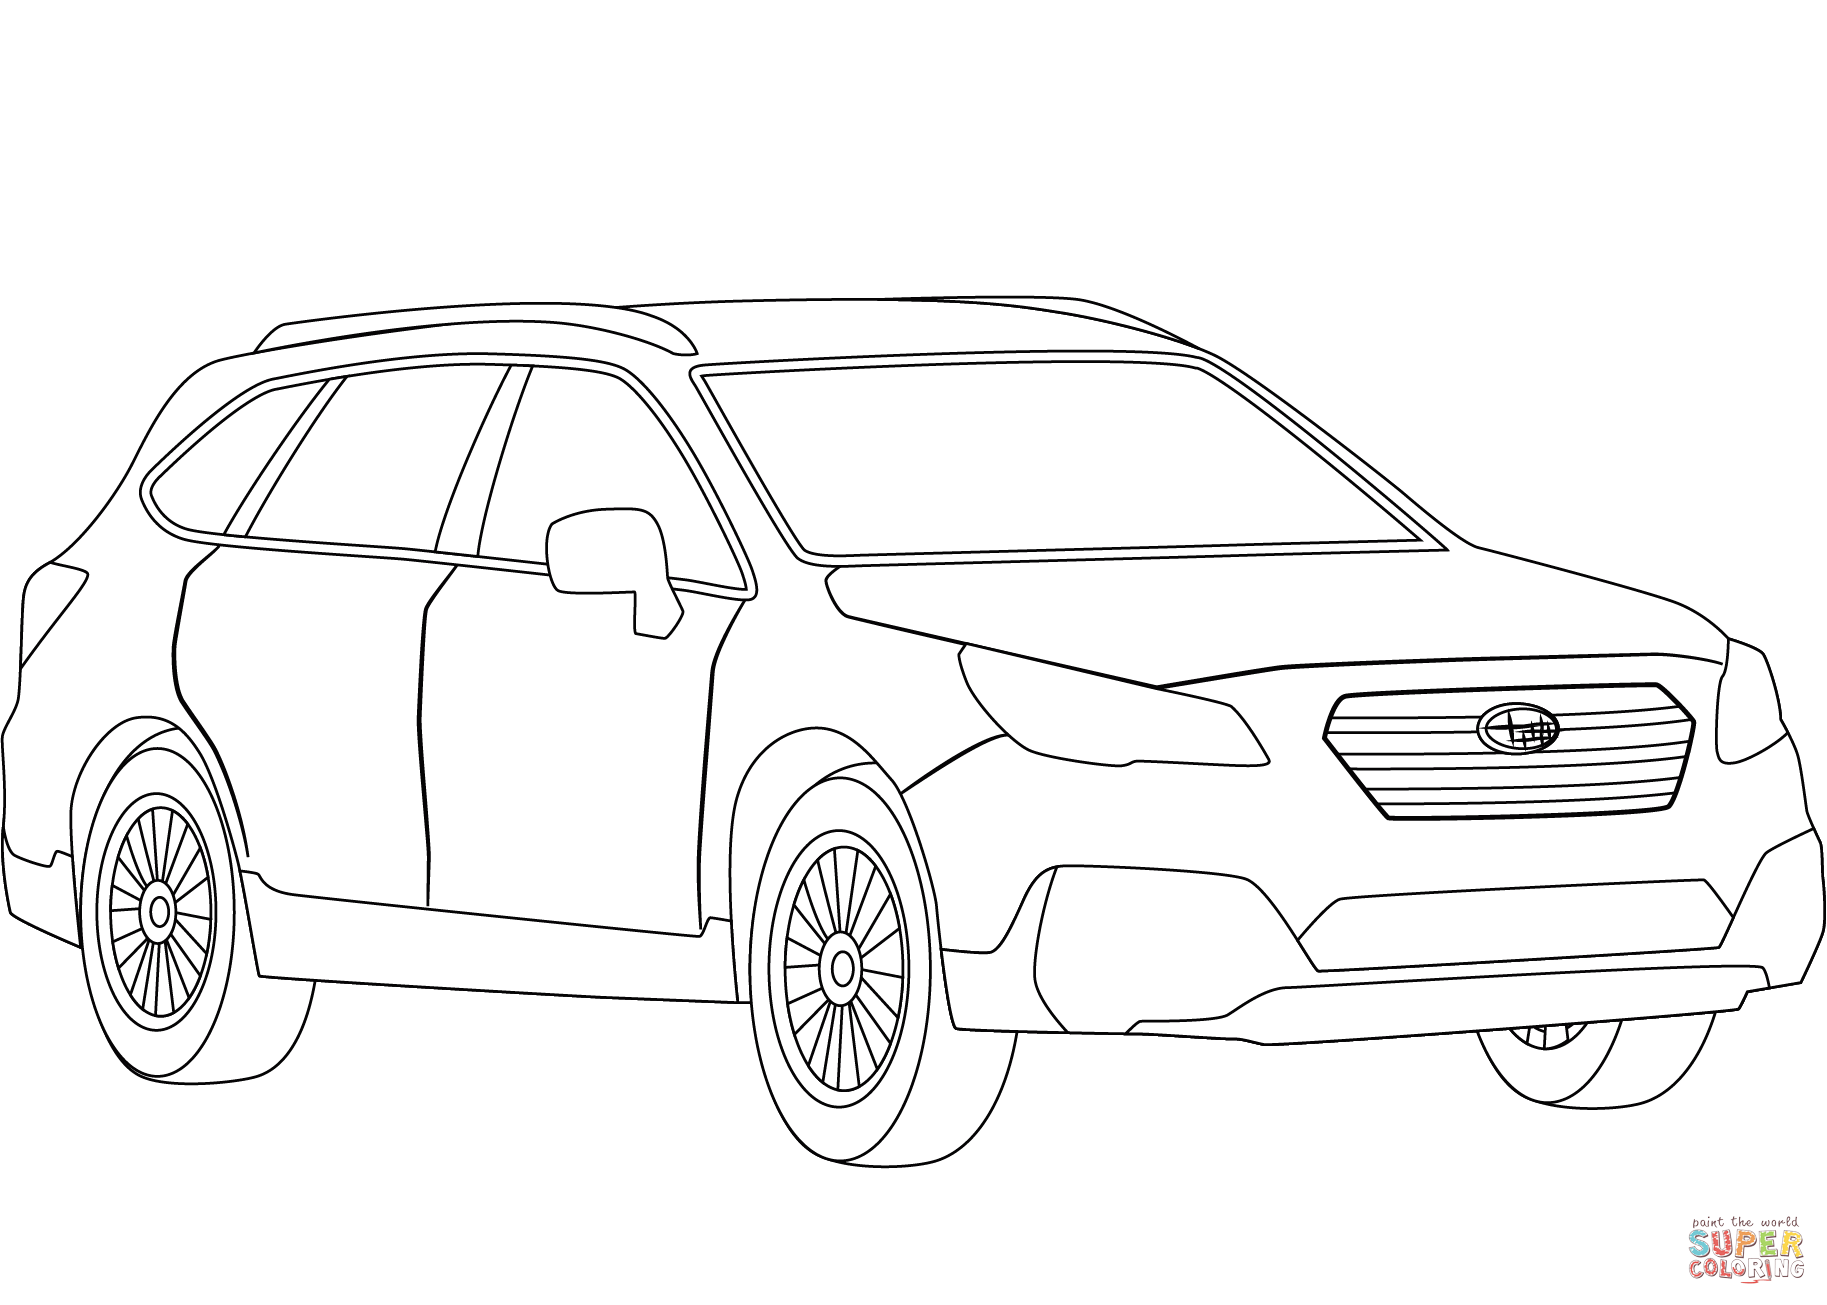 Subaru outback coloring page free printable coloring pages